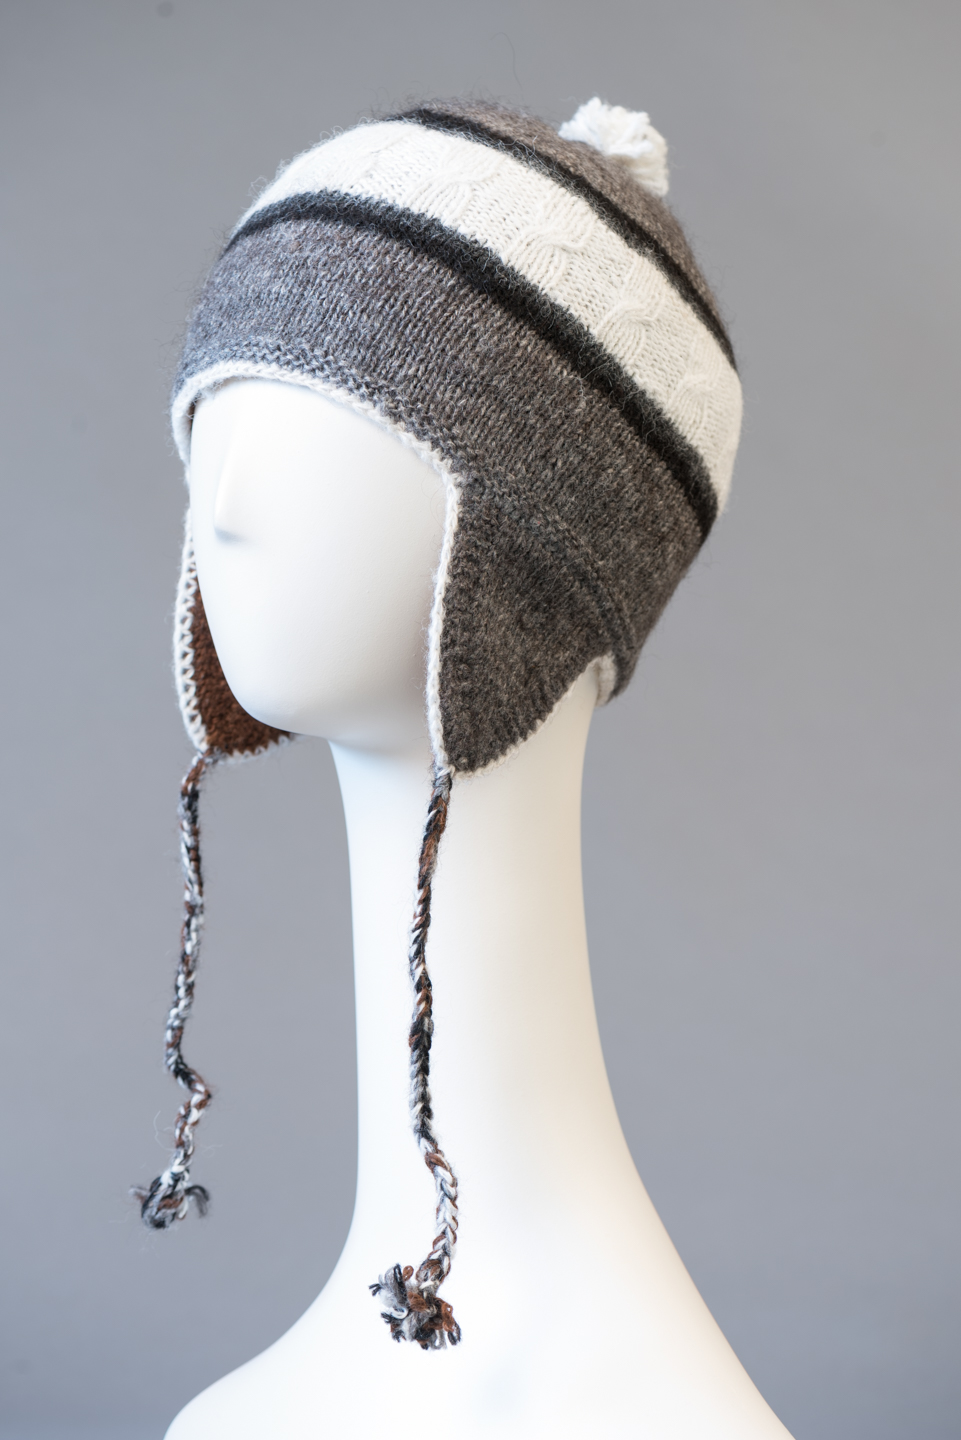 tuque andine double, rayée / double Andean hat, striped